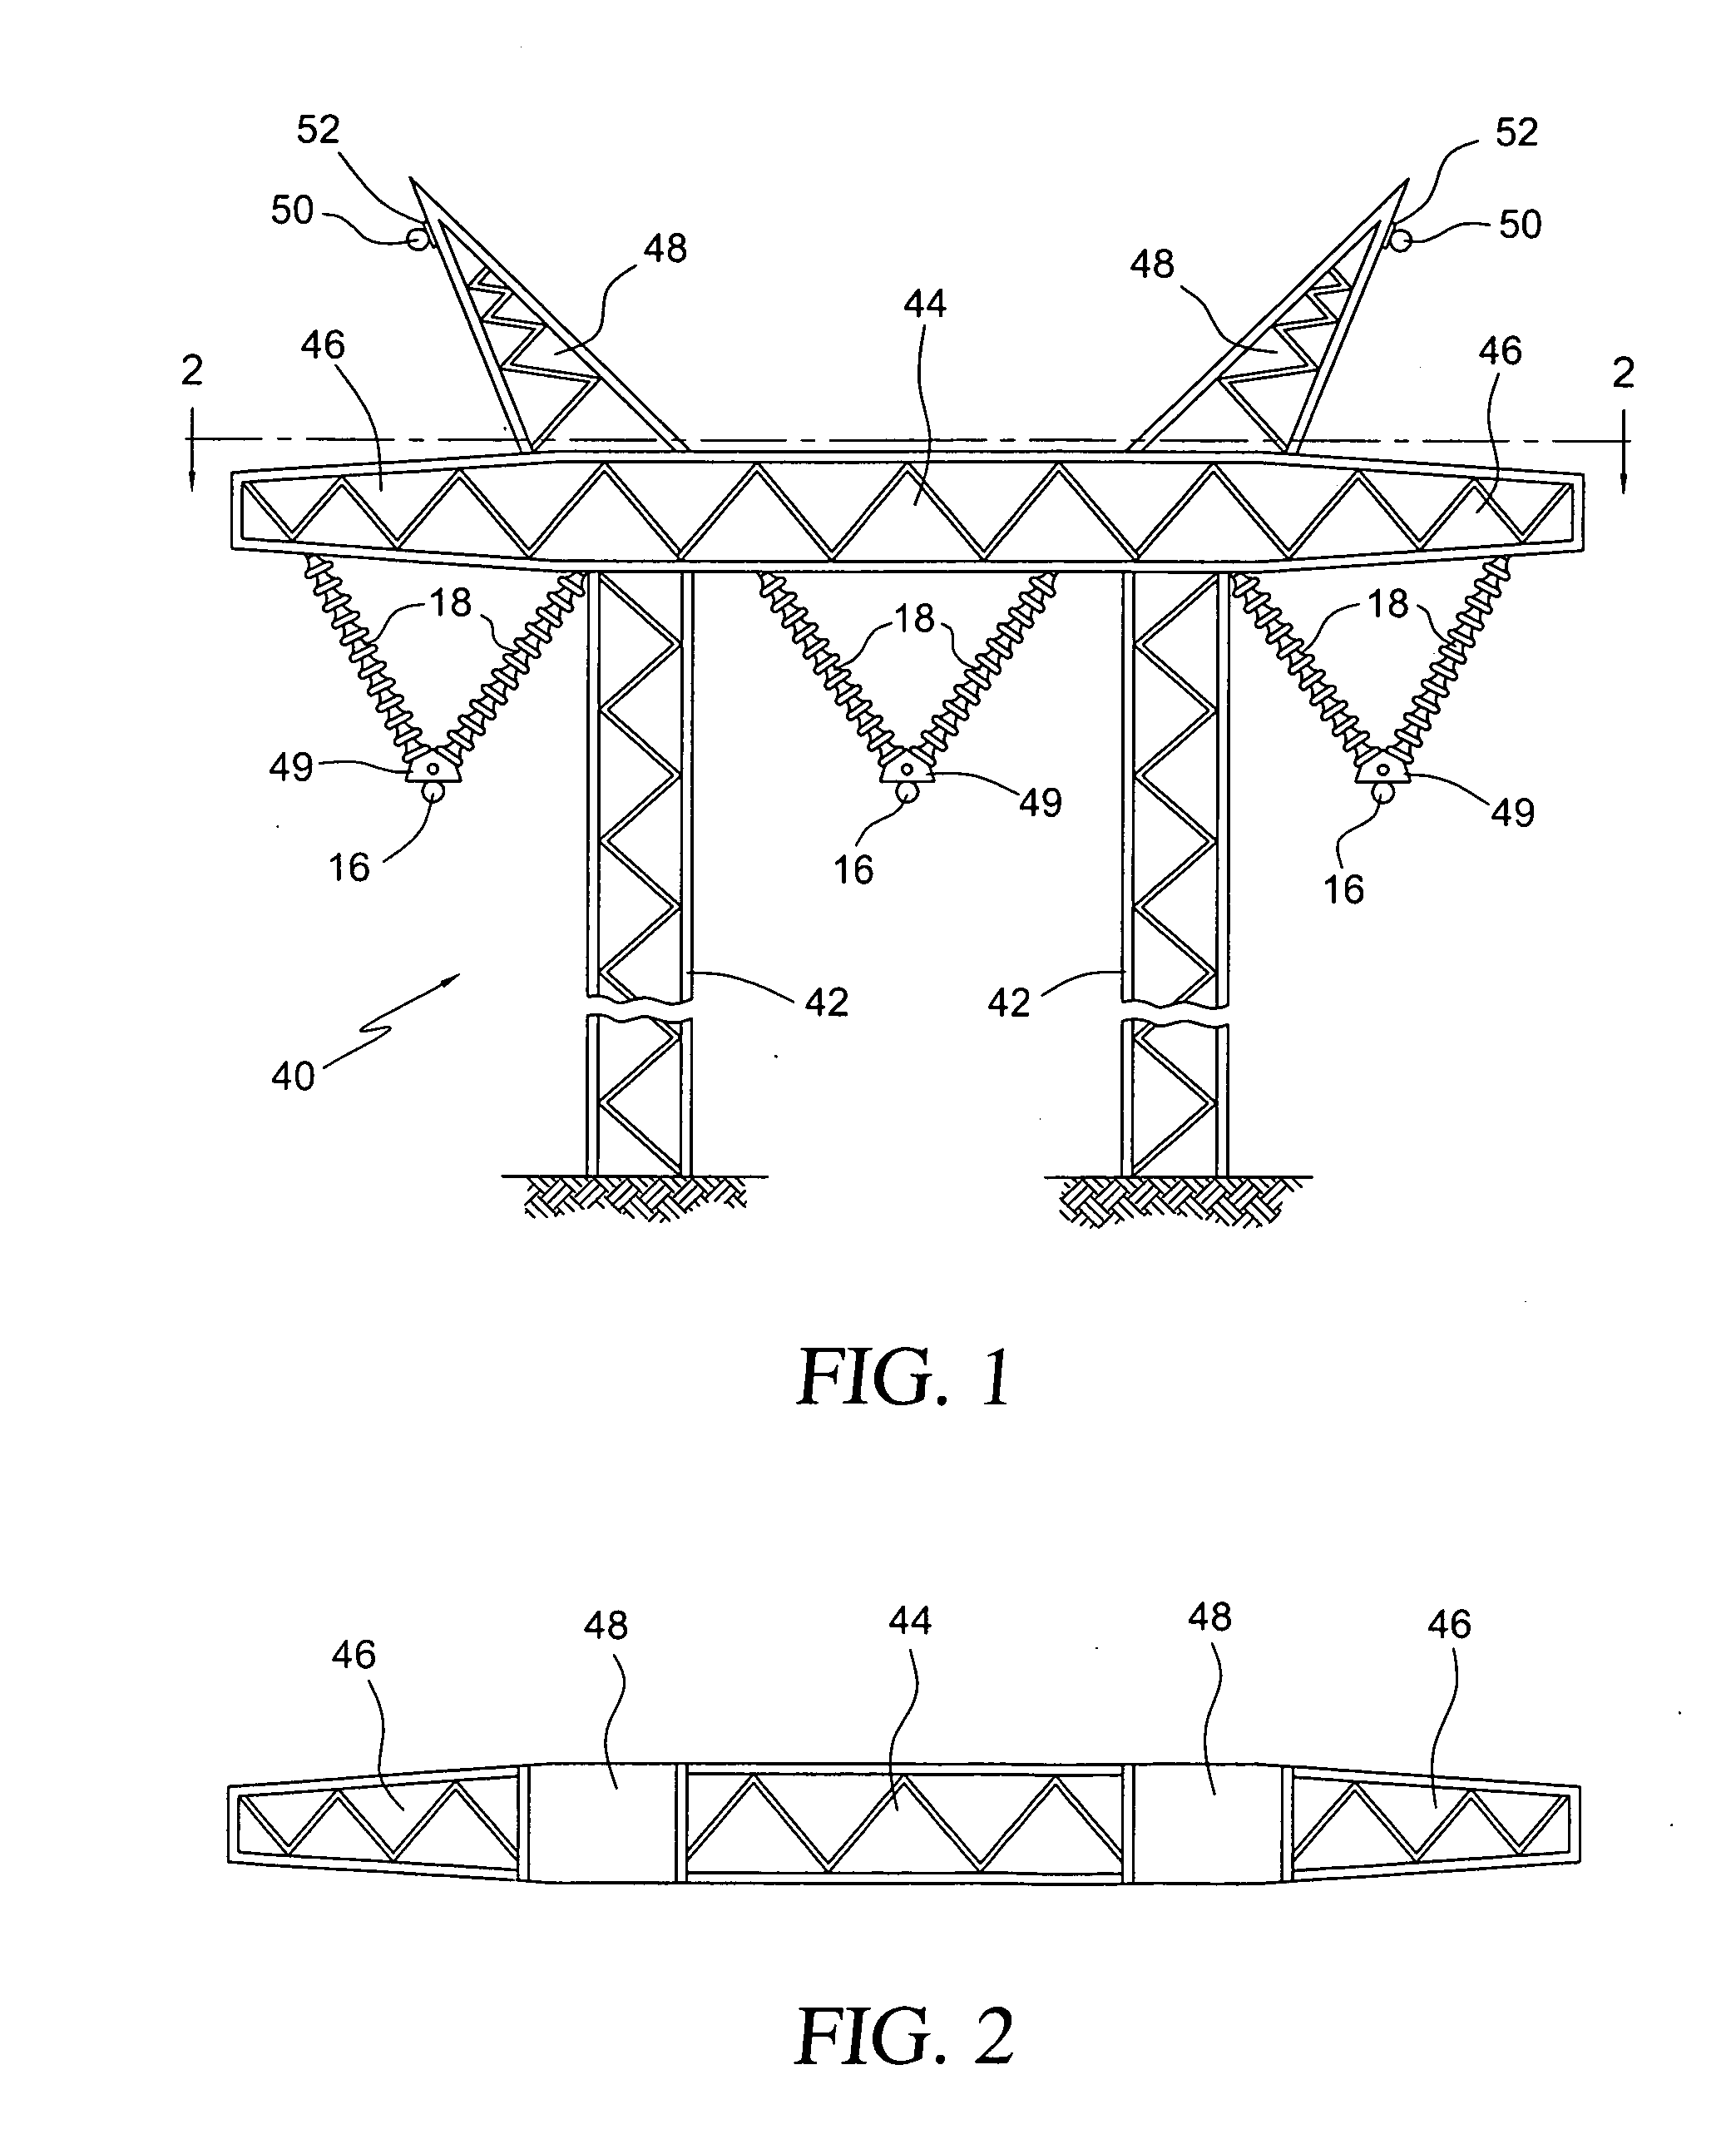 Method of replacing insulators on a tower and insulator support and transport assembly therefor